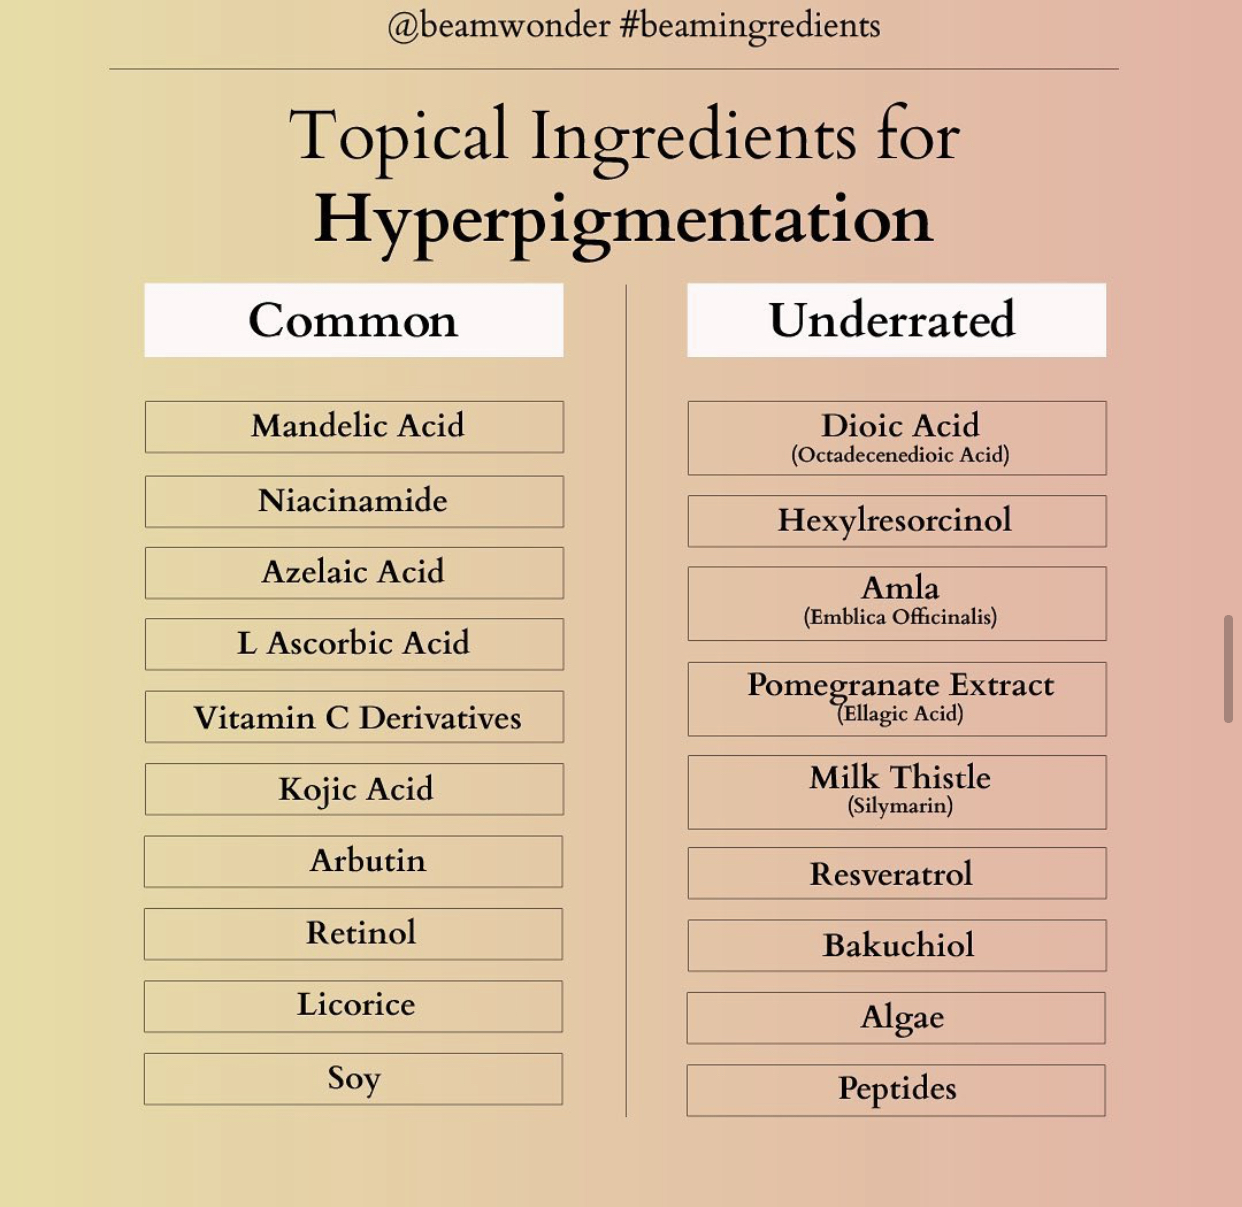 Topical Ingredients for Hyperpigmentation